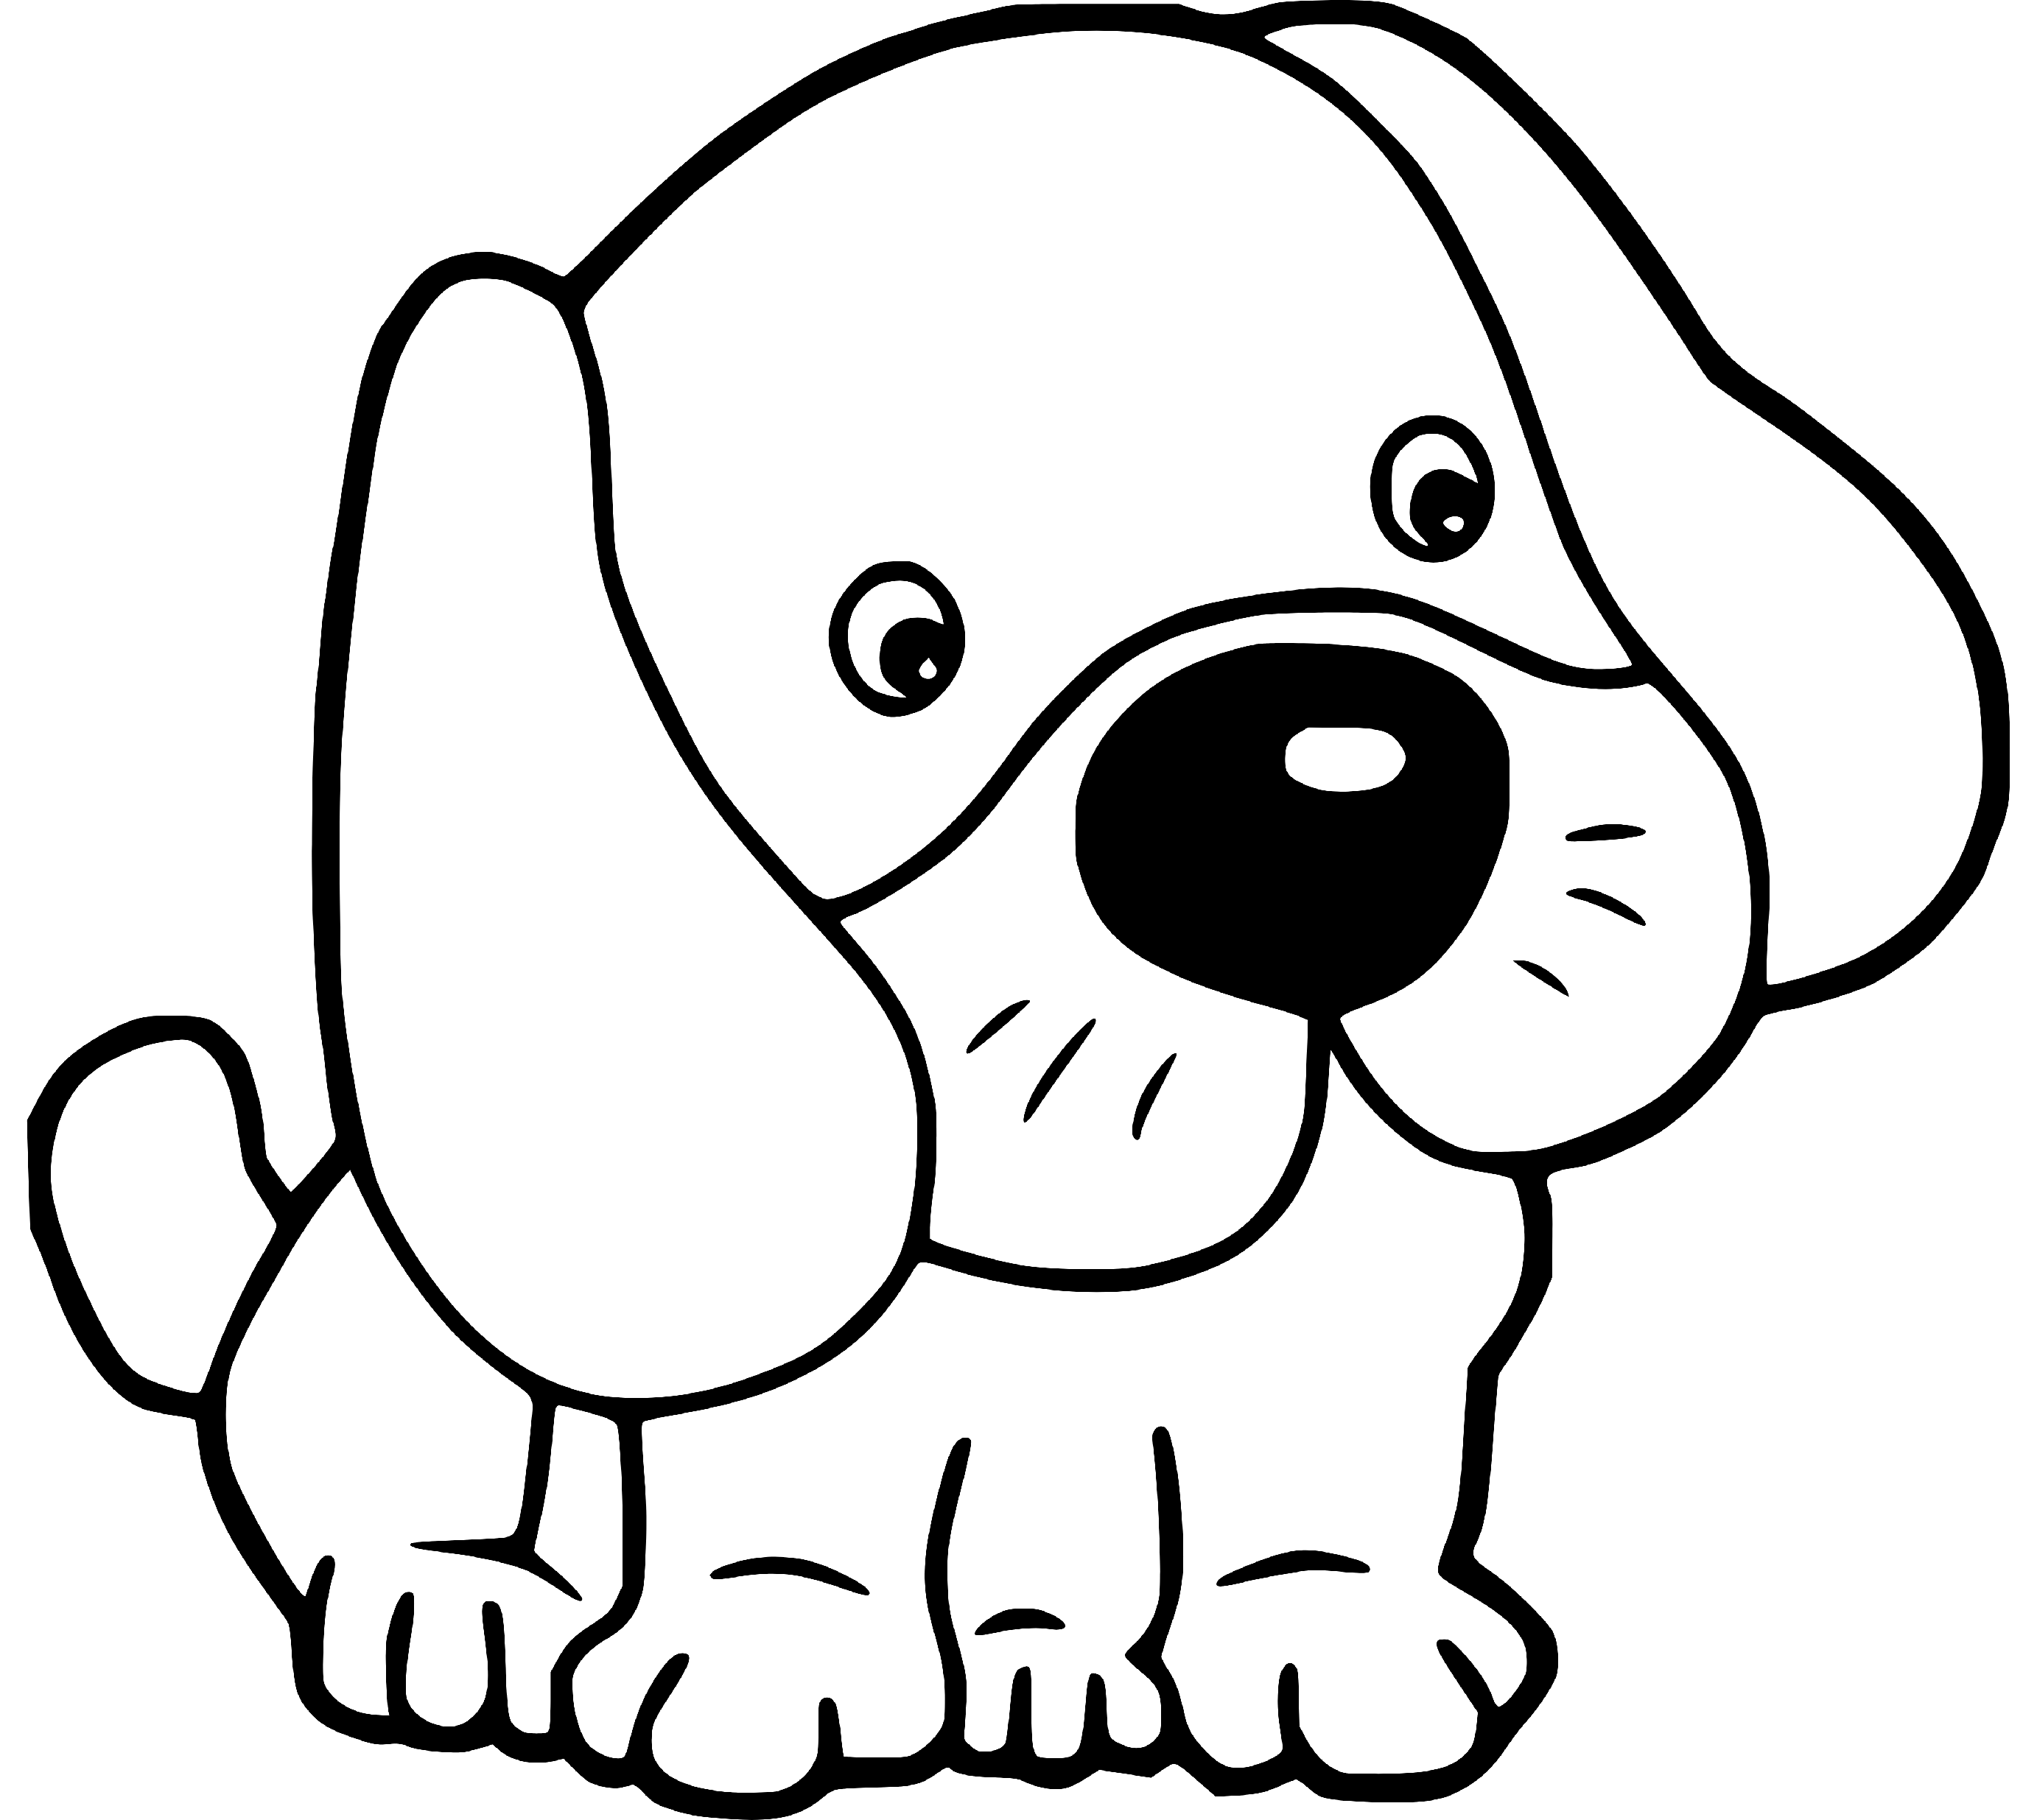 Simple Puppy Coloring Page for Kids - SheetalColor.com